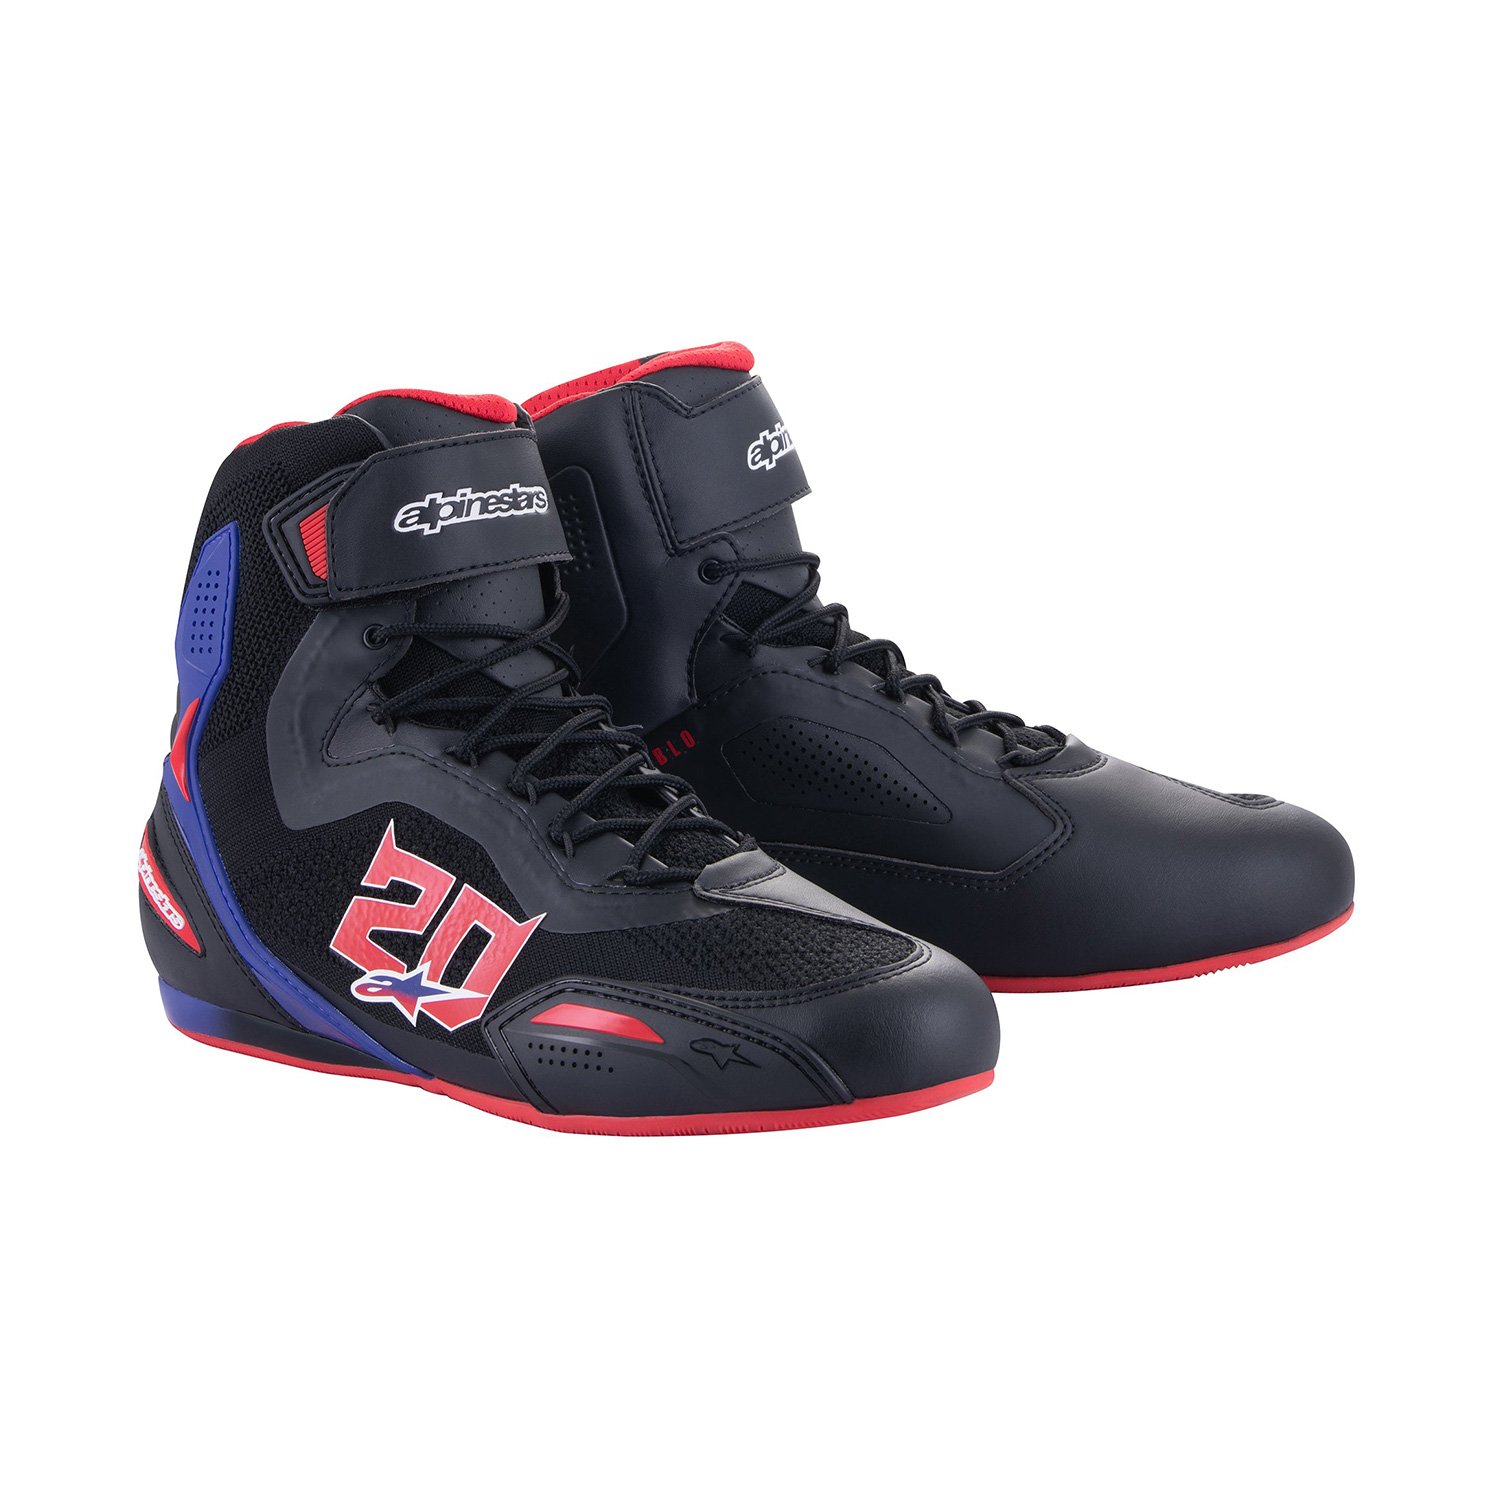 Image of Alpinestars FQ20 Faster-3 Rideknit Noir Bright Rouge Bleu Chaussures Taille US 13